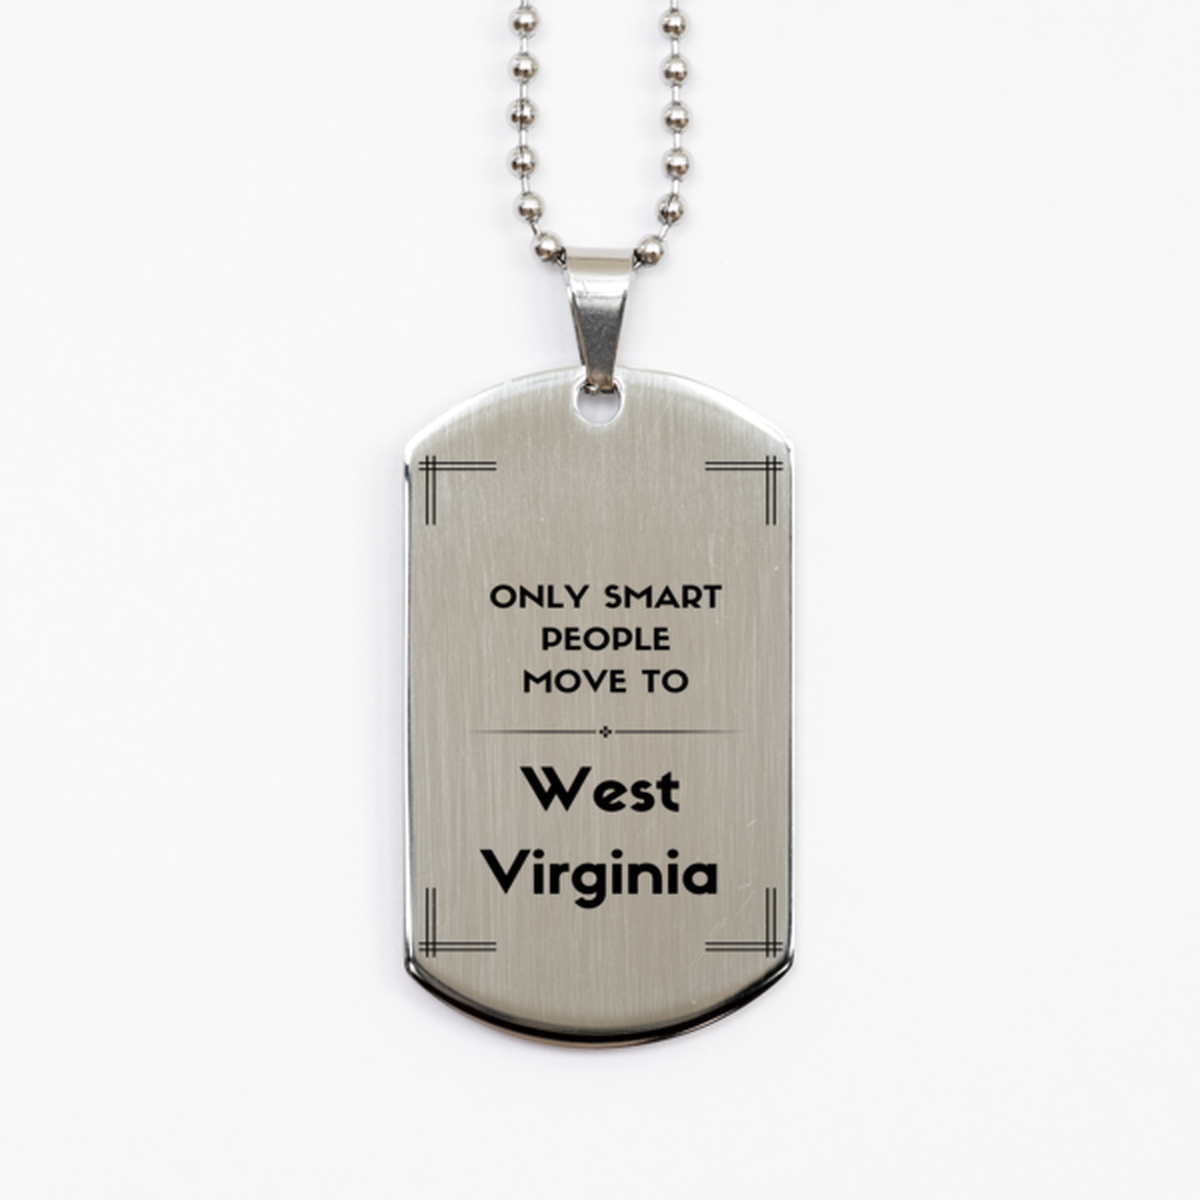 Only smart people move to West Virginia Silver Dog Tag, Gag Gifts For West Virginia, Move to West Virginia Gifts for Friends Coworker Funny Saying Quote